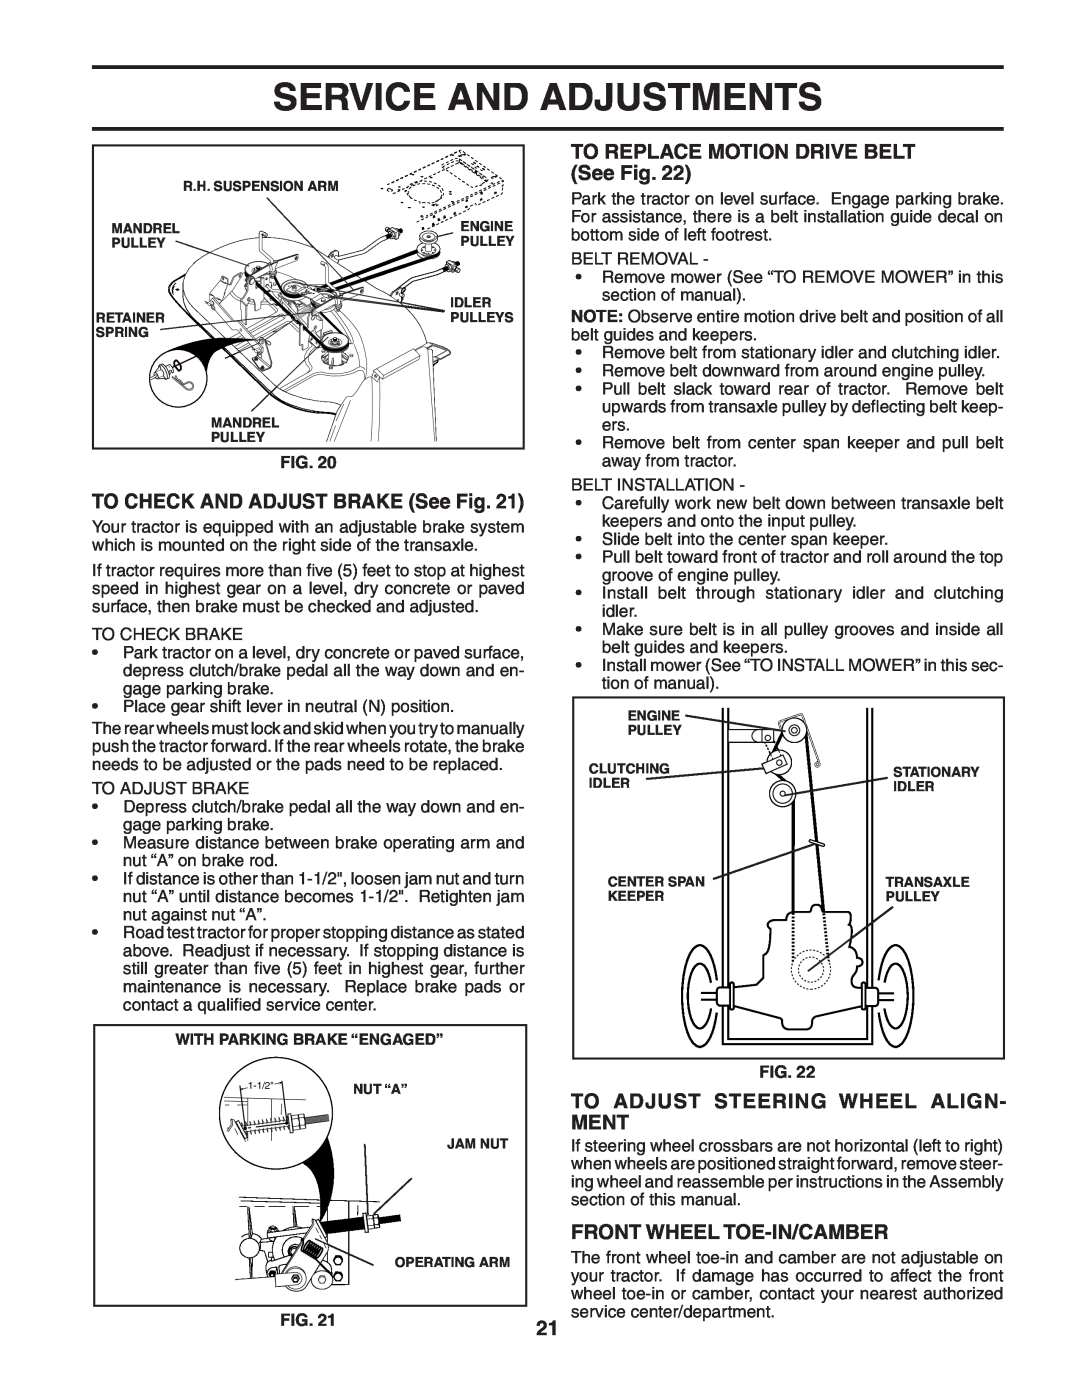 Poulan 183981 manual TO CHECK AND ADJUST BRAKE See Fig, TO REPLACE MOTION DRIVE BELT See Fig, Front Wheel Toe-In/Camber 